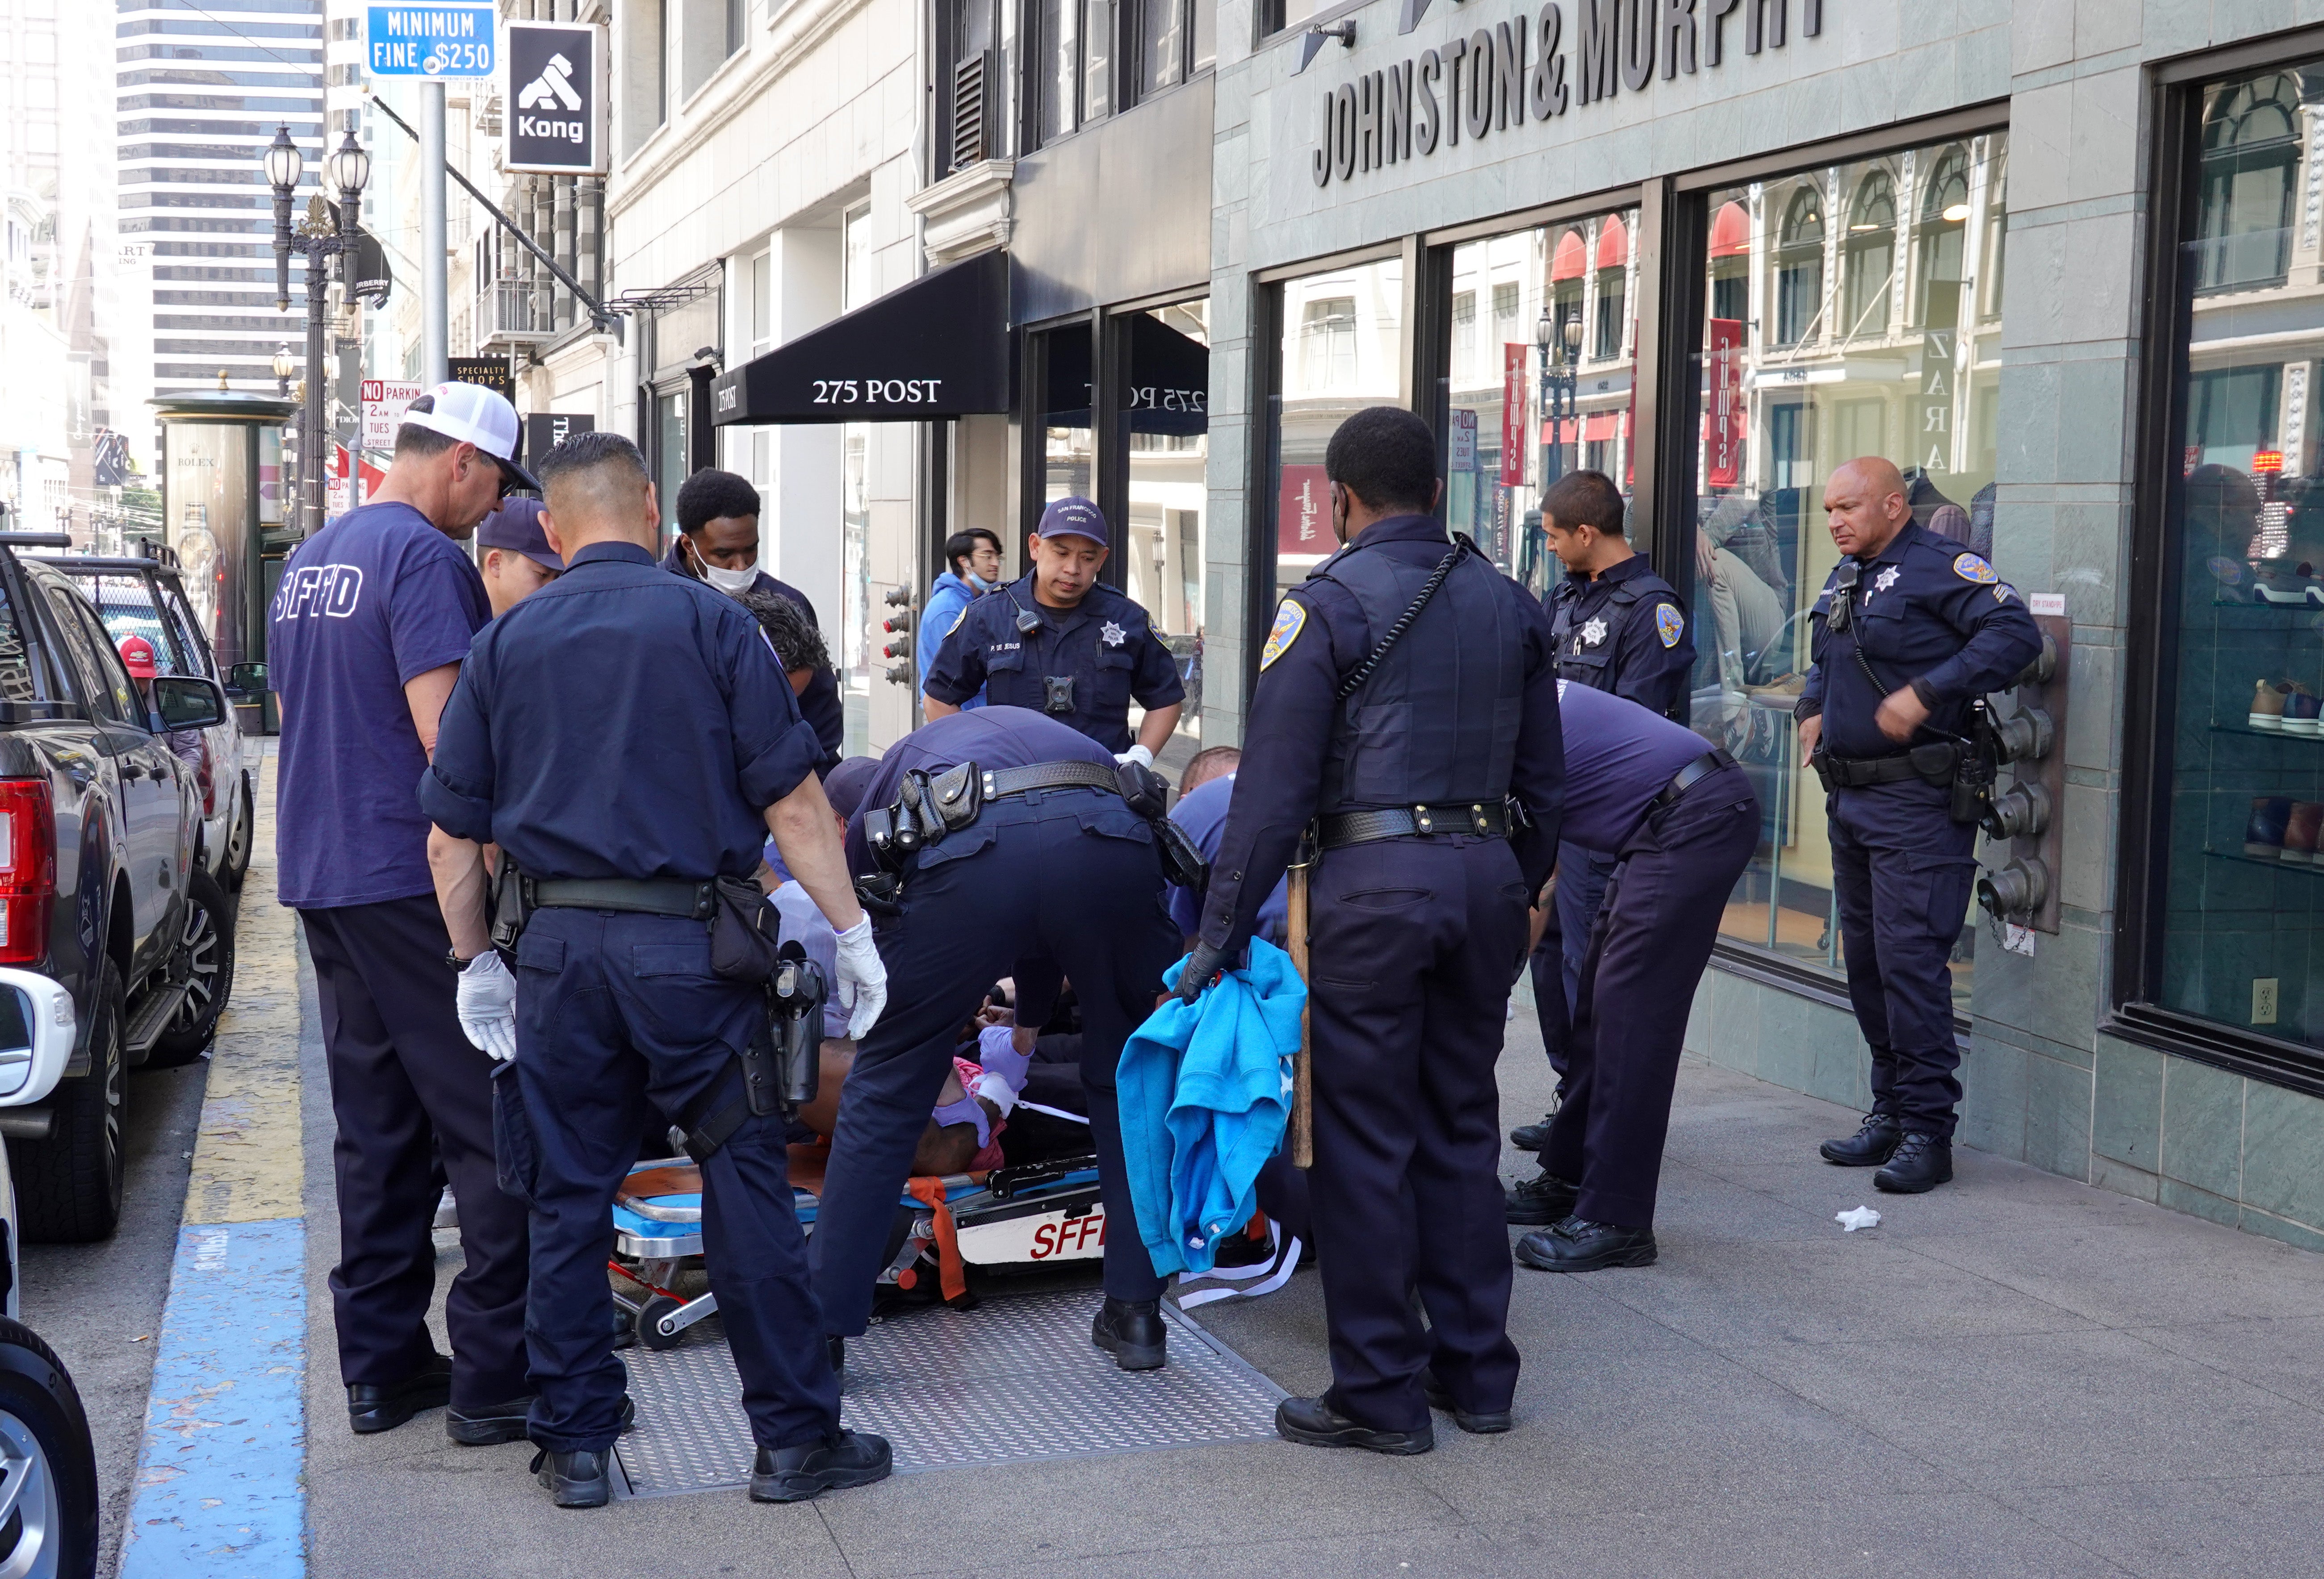 San Francisco police officers assist San Francisco firefighters during a medical call on May 24, 2022 in San Francisco, California